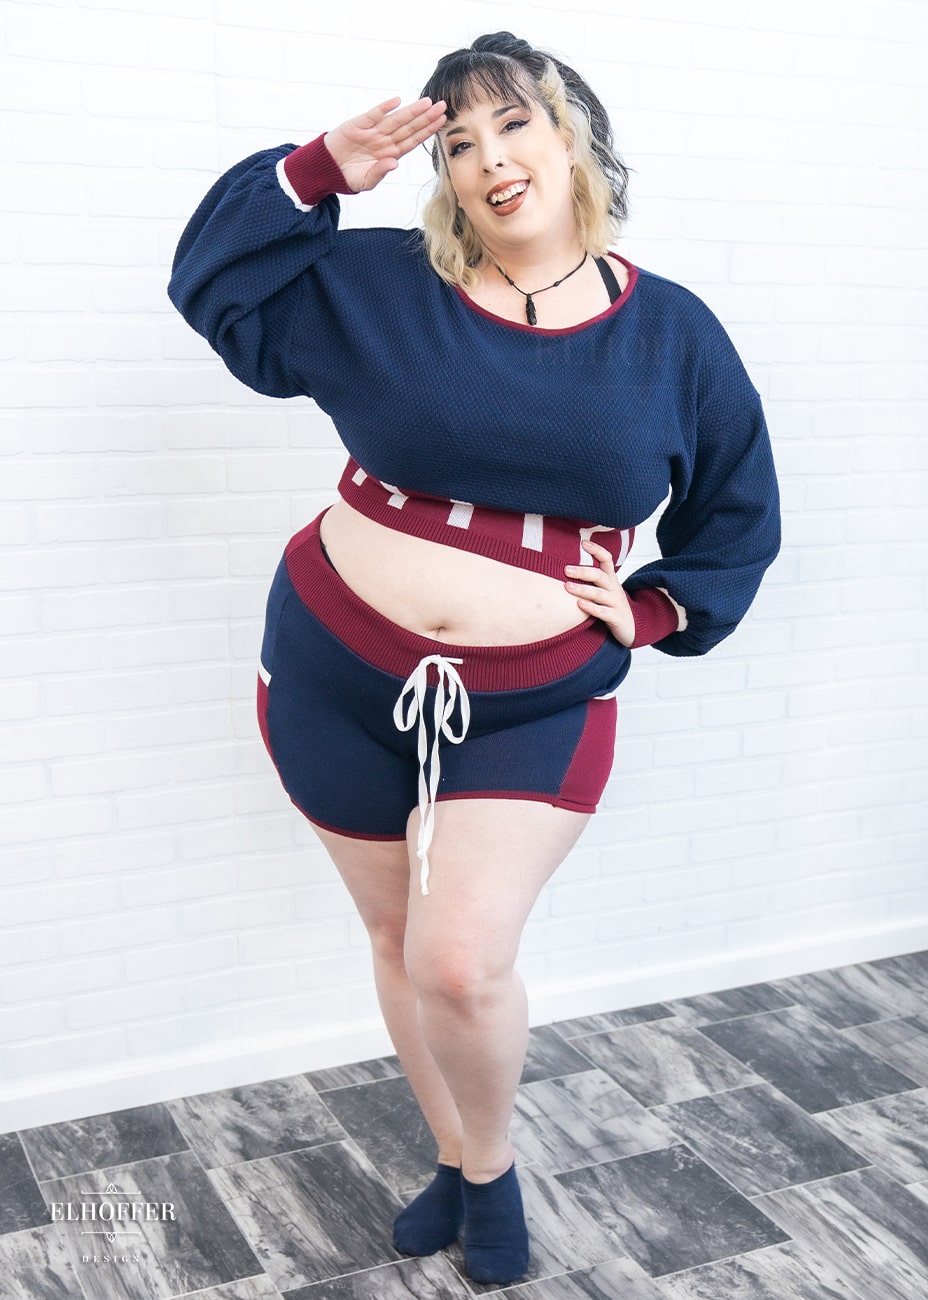 Katie Lynn, a size 2XL fair skinned model with black and blonde hair, is wearing the red, white and blue knit oversized crop top with bishop sleeves. The sleeves and top of the crop are blue with a waffle knit, the waist is vertical red and white stripes. The cuffs are mainly red with a white detail. There is also a red detail at the neckline.